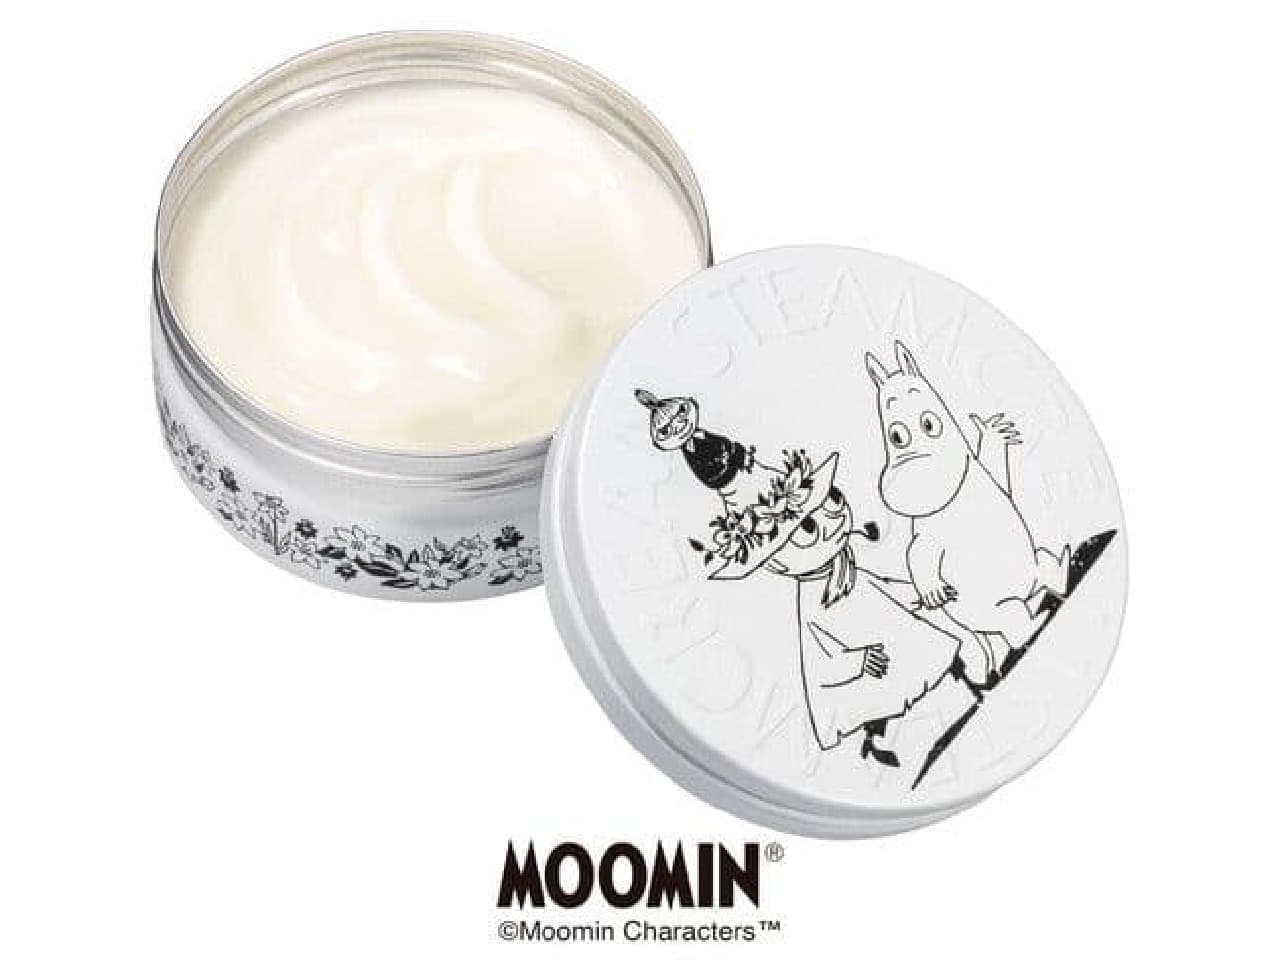 Steam cream "Living with Moomins Friends"